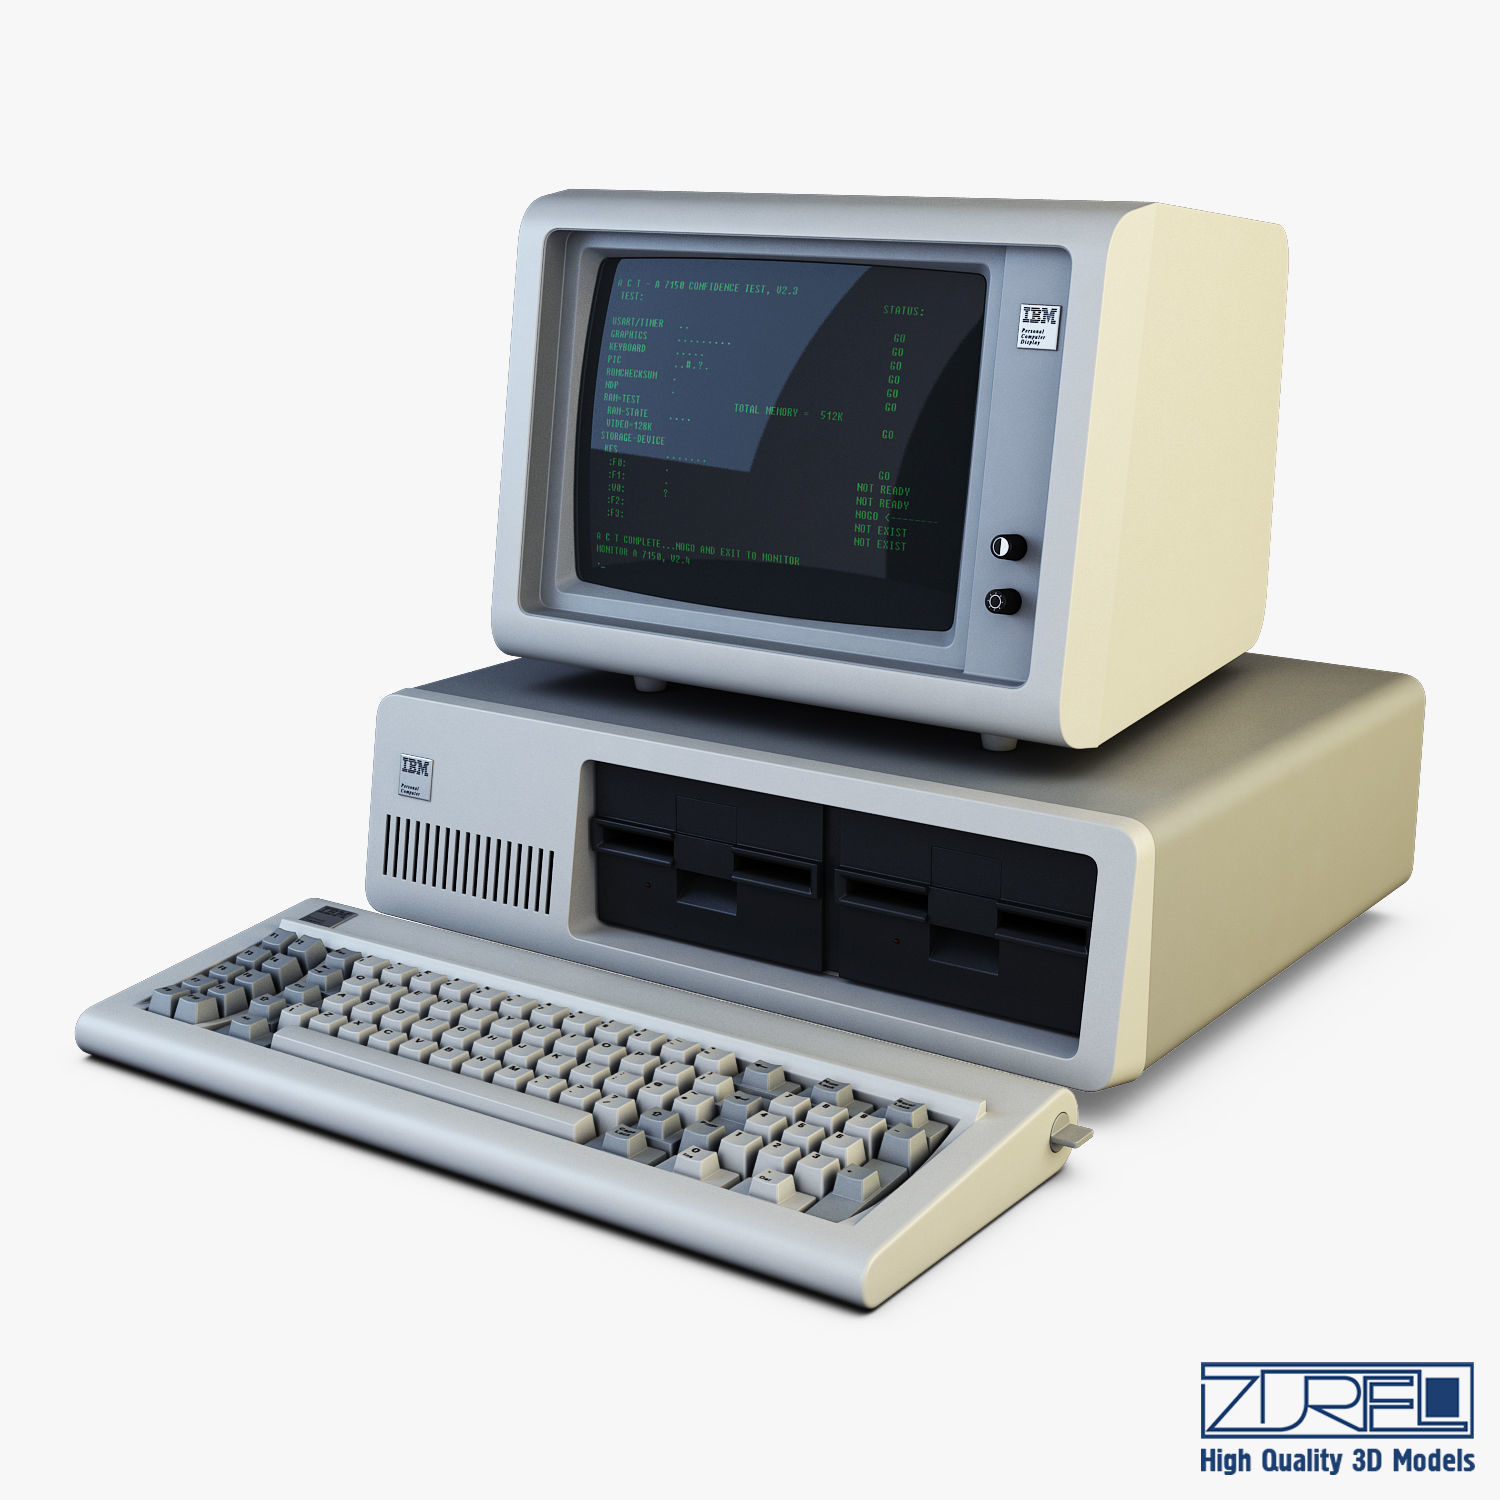 Where it all started…the IBM 5150 PC